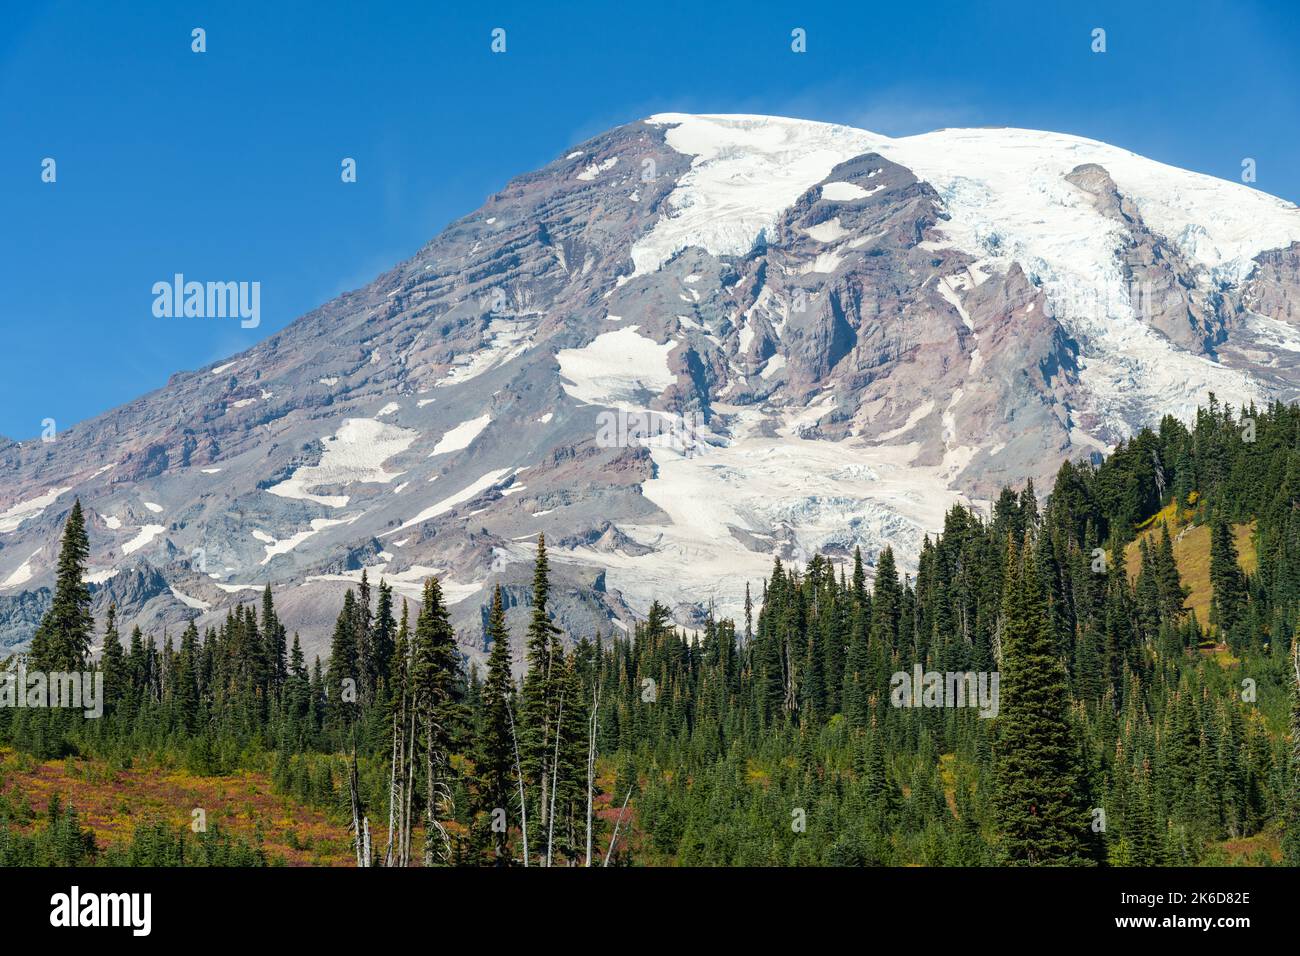 Volcanic Mount Rainier rises above the tree line in fall with receding glaciers.  The peak is majestic against blue sky with barren flanks Stock Photo